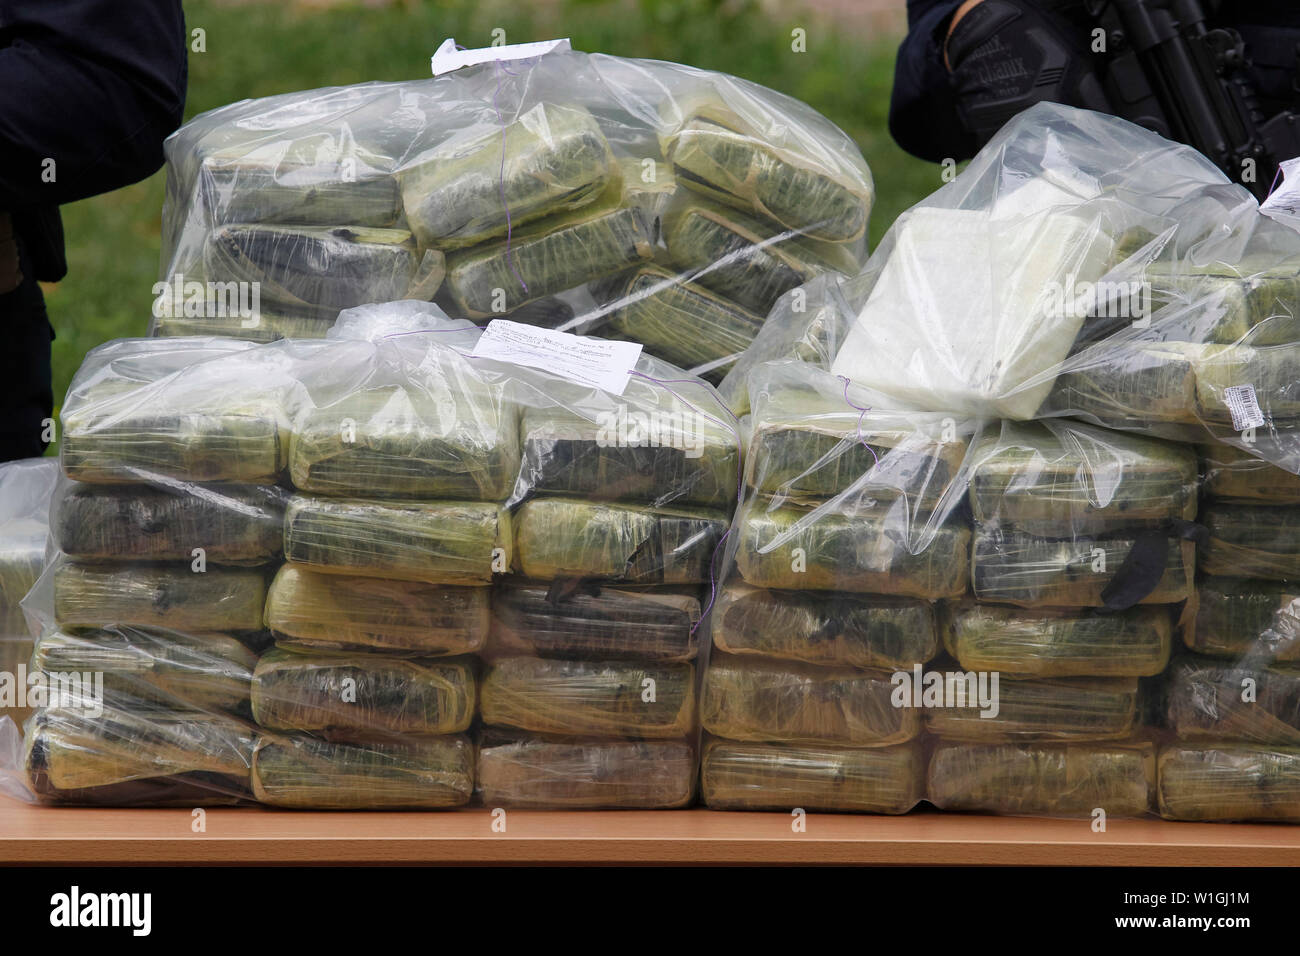 Bags of cocaine, which were seized during a special police operation, are seen at a press conference of the National Police and the Anti-Narcotic Police Department and the U.S. Department of the Drug Enforcement Administration (DEA) in the Ministry of Internal Affairs in Kiev.Ukrainian police in cooperation with the U.S. DEA revealed the transnational drug trafficking channel from Colombia to the EU and detained drug dealers and seized about 400 kg of cocaine estimated cost of 60 million US dollars, which were to be transferred from Latin America through Ukraine to Europe by a suspected intern Stock Photo